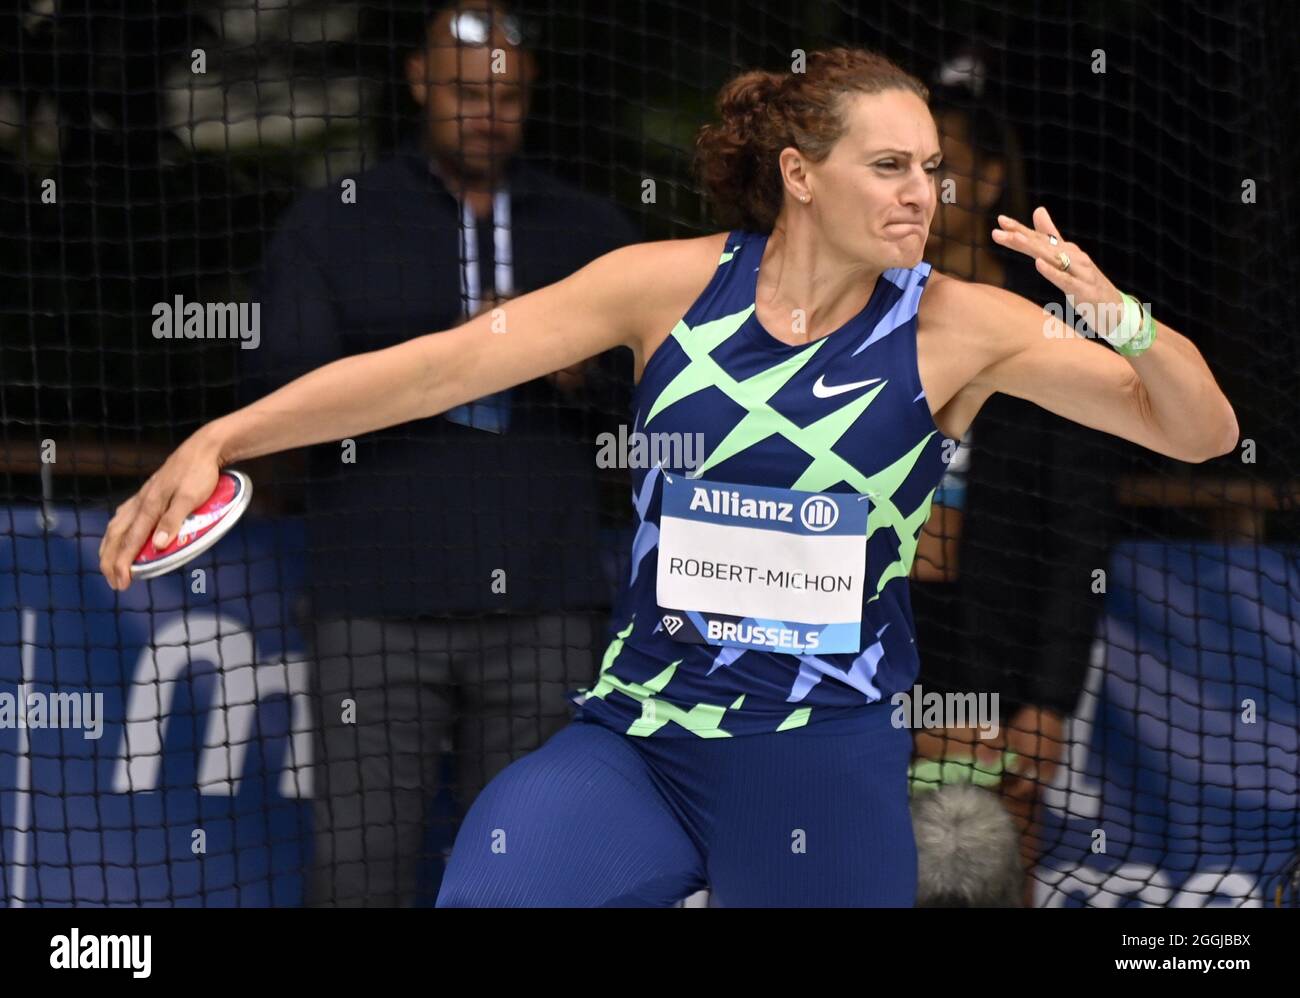 French Melina Robert-Michon pictured in action during the women's discus throw event, part of the 2021 edition of the Memorial Van Damme athletics mee Stock Photo